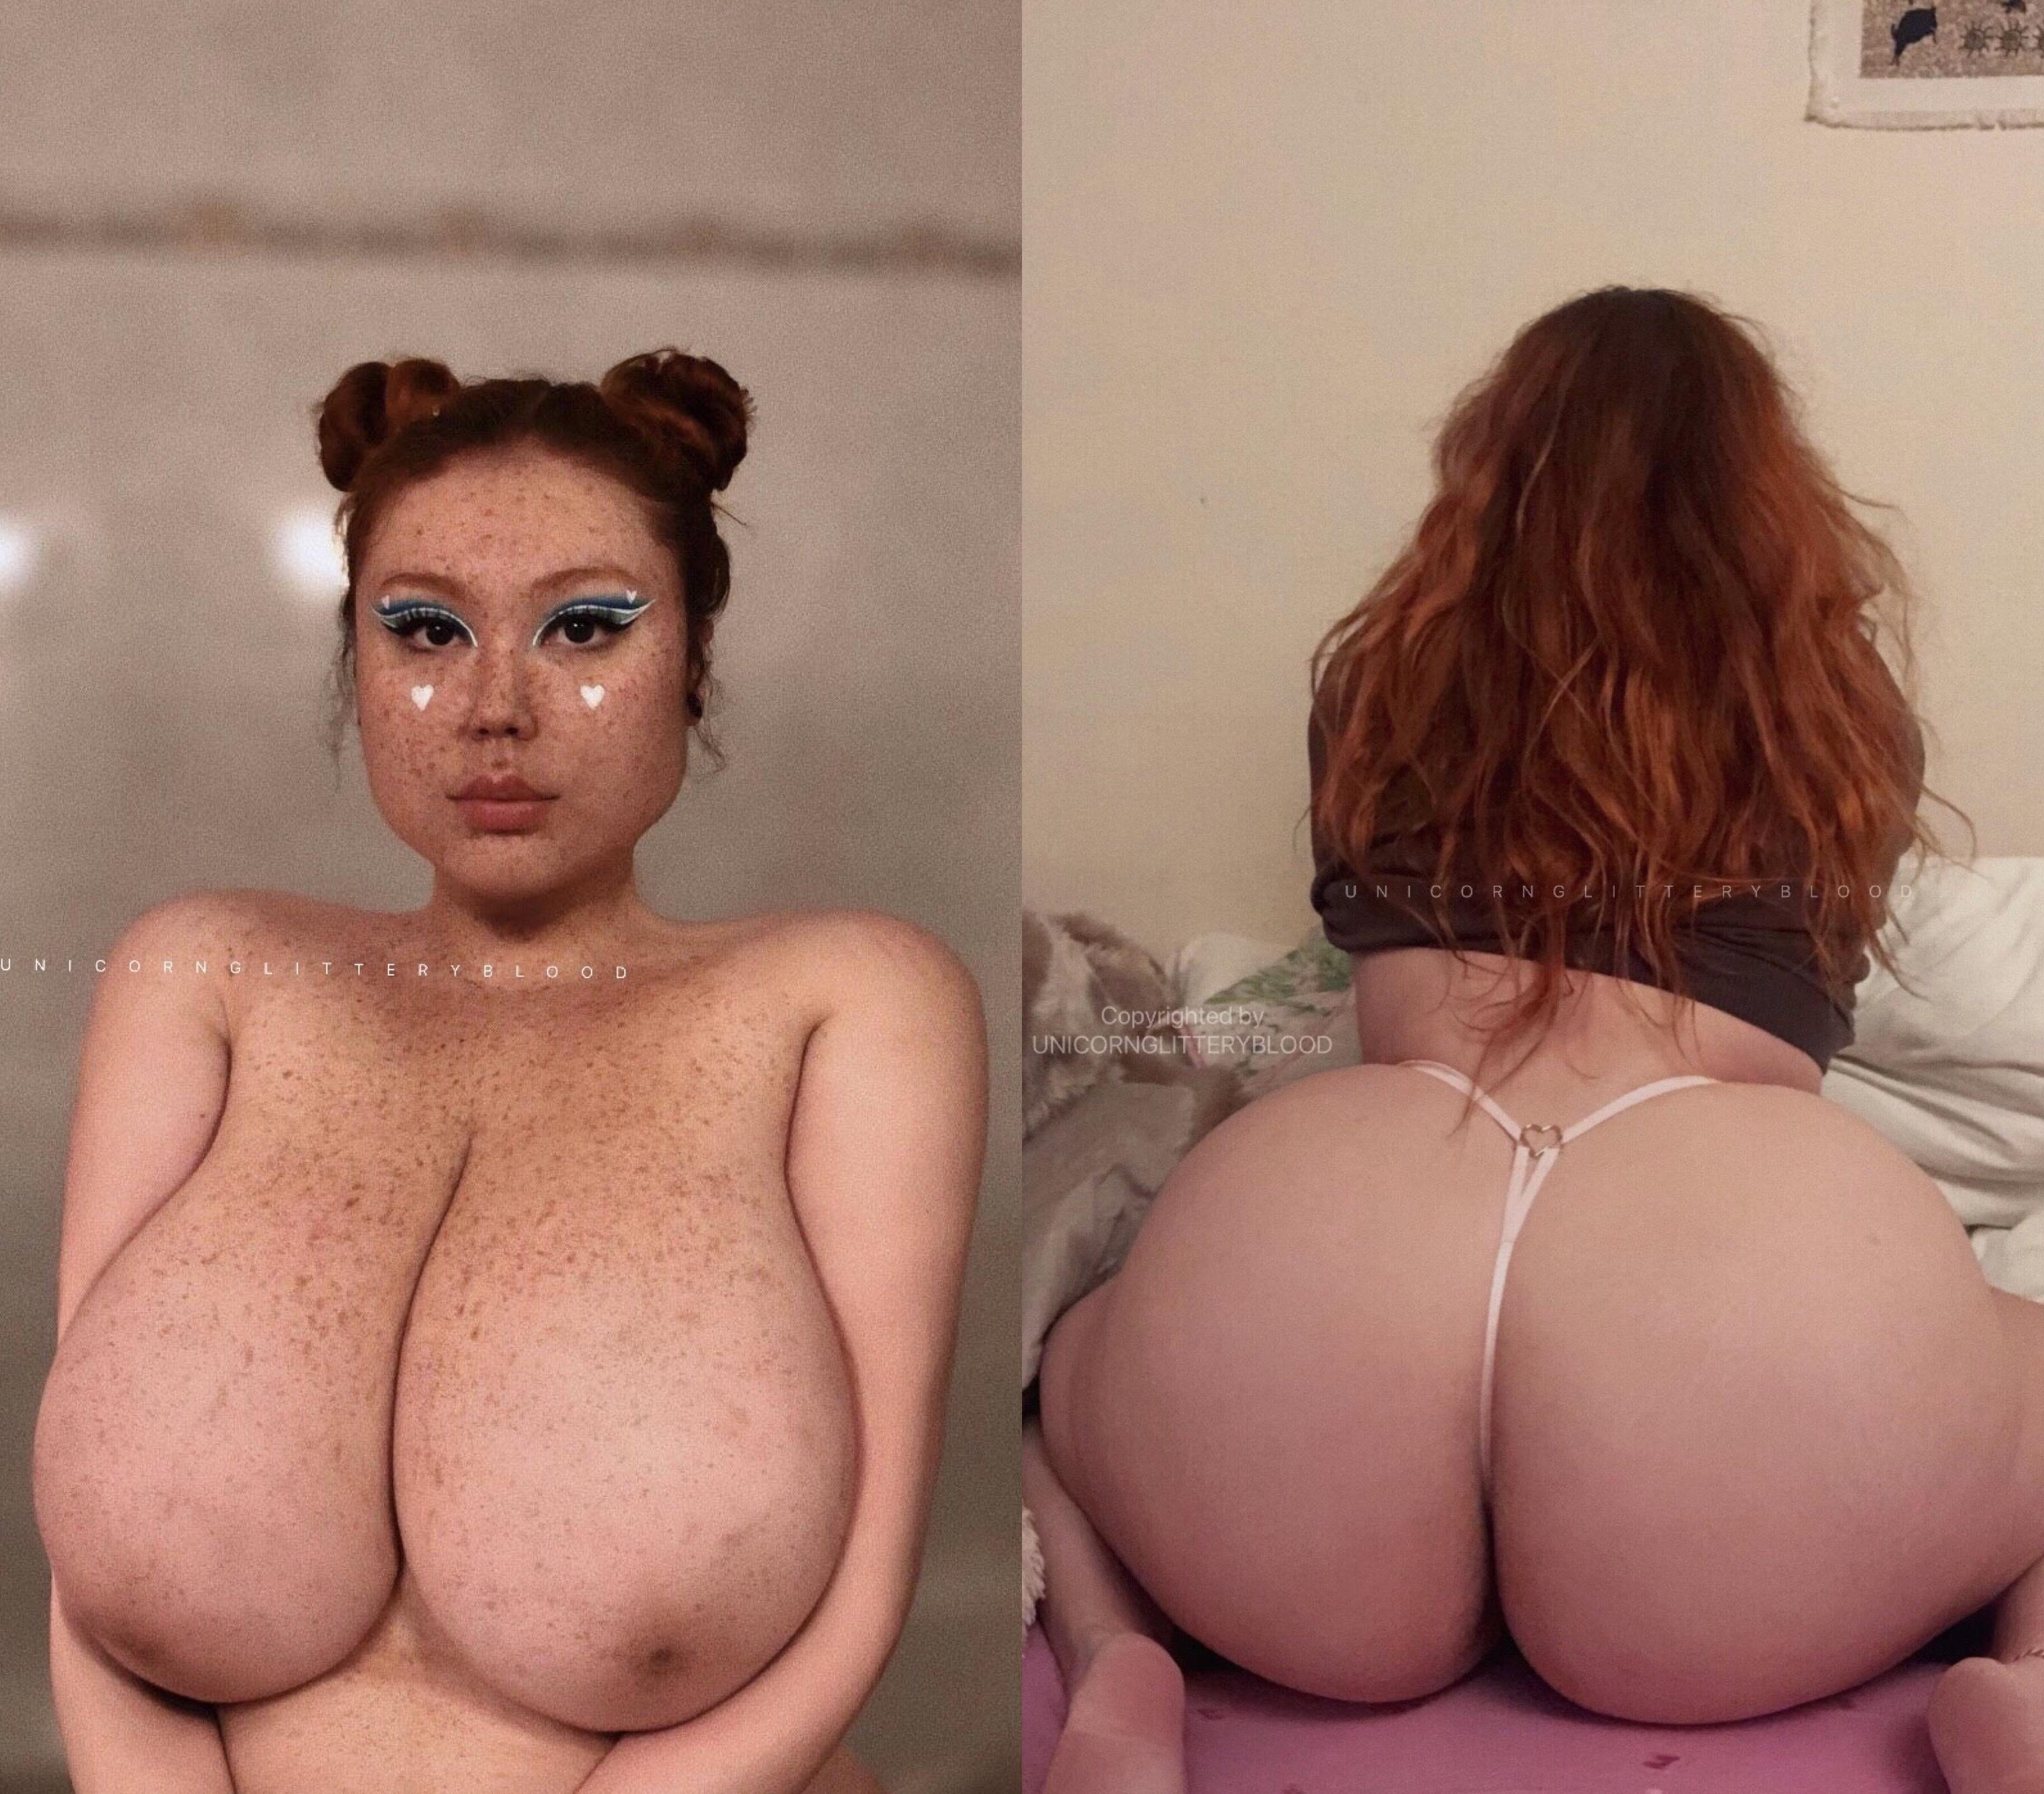 PAWG OC Youll fuck a pawg you met on here